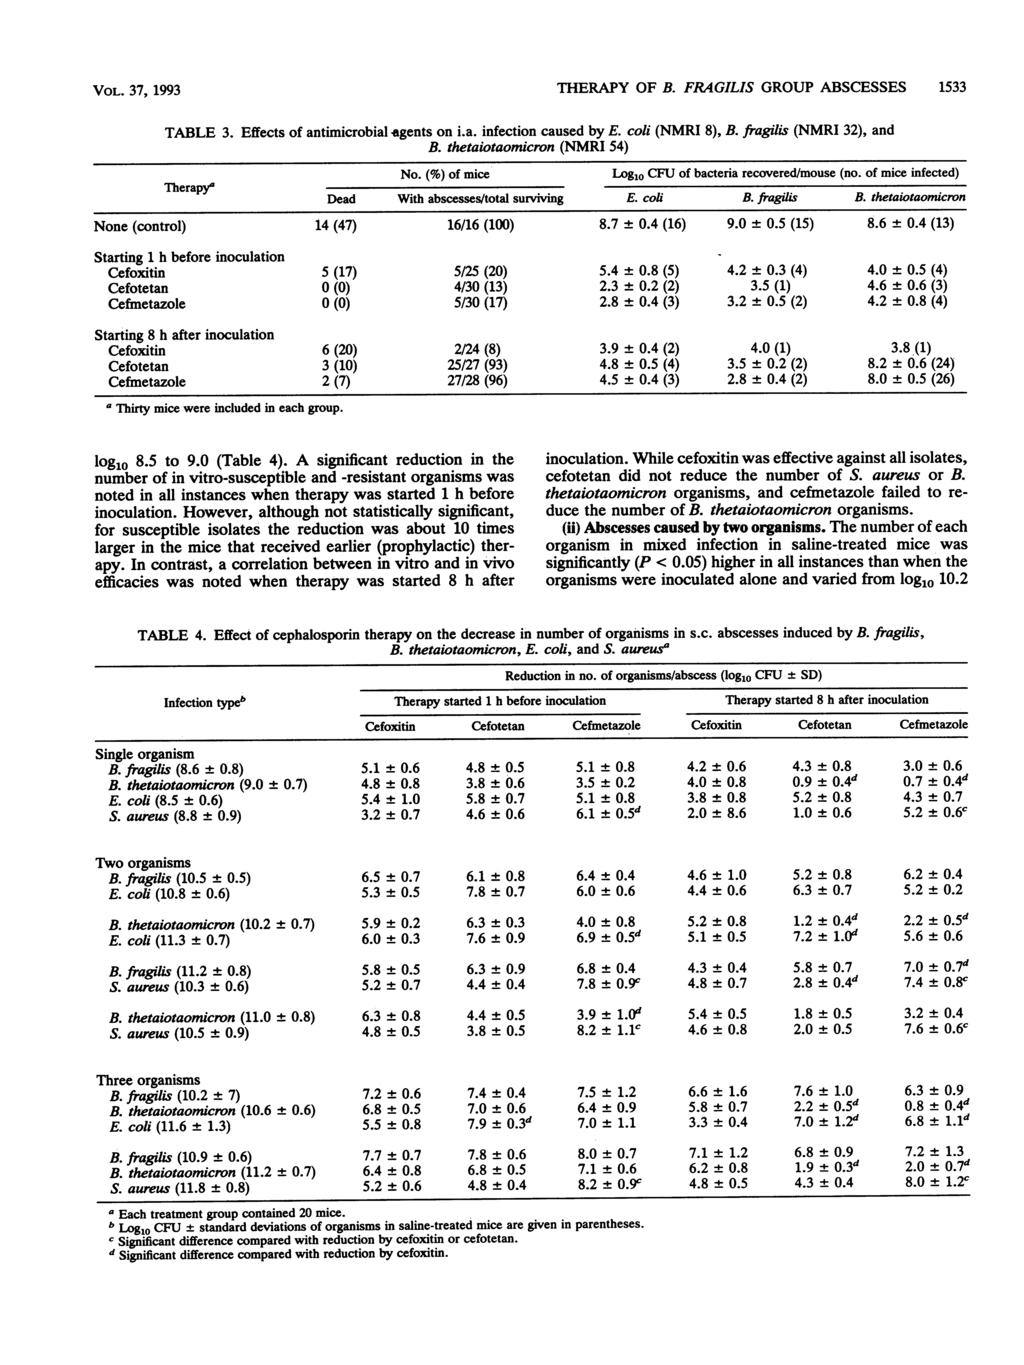 VOL. 37, 1993 THERAPY OF B. FRAGILIS GROUP ABSCESSES 1533 TABLE 3. Effects of antimicrobial agents on i.a. infection caused by E. coli (NMRI 8), B. fragilis (NMRI 32), and B.